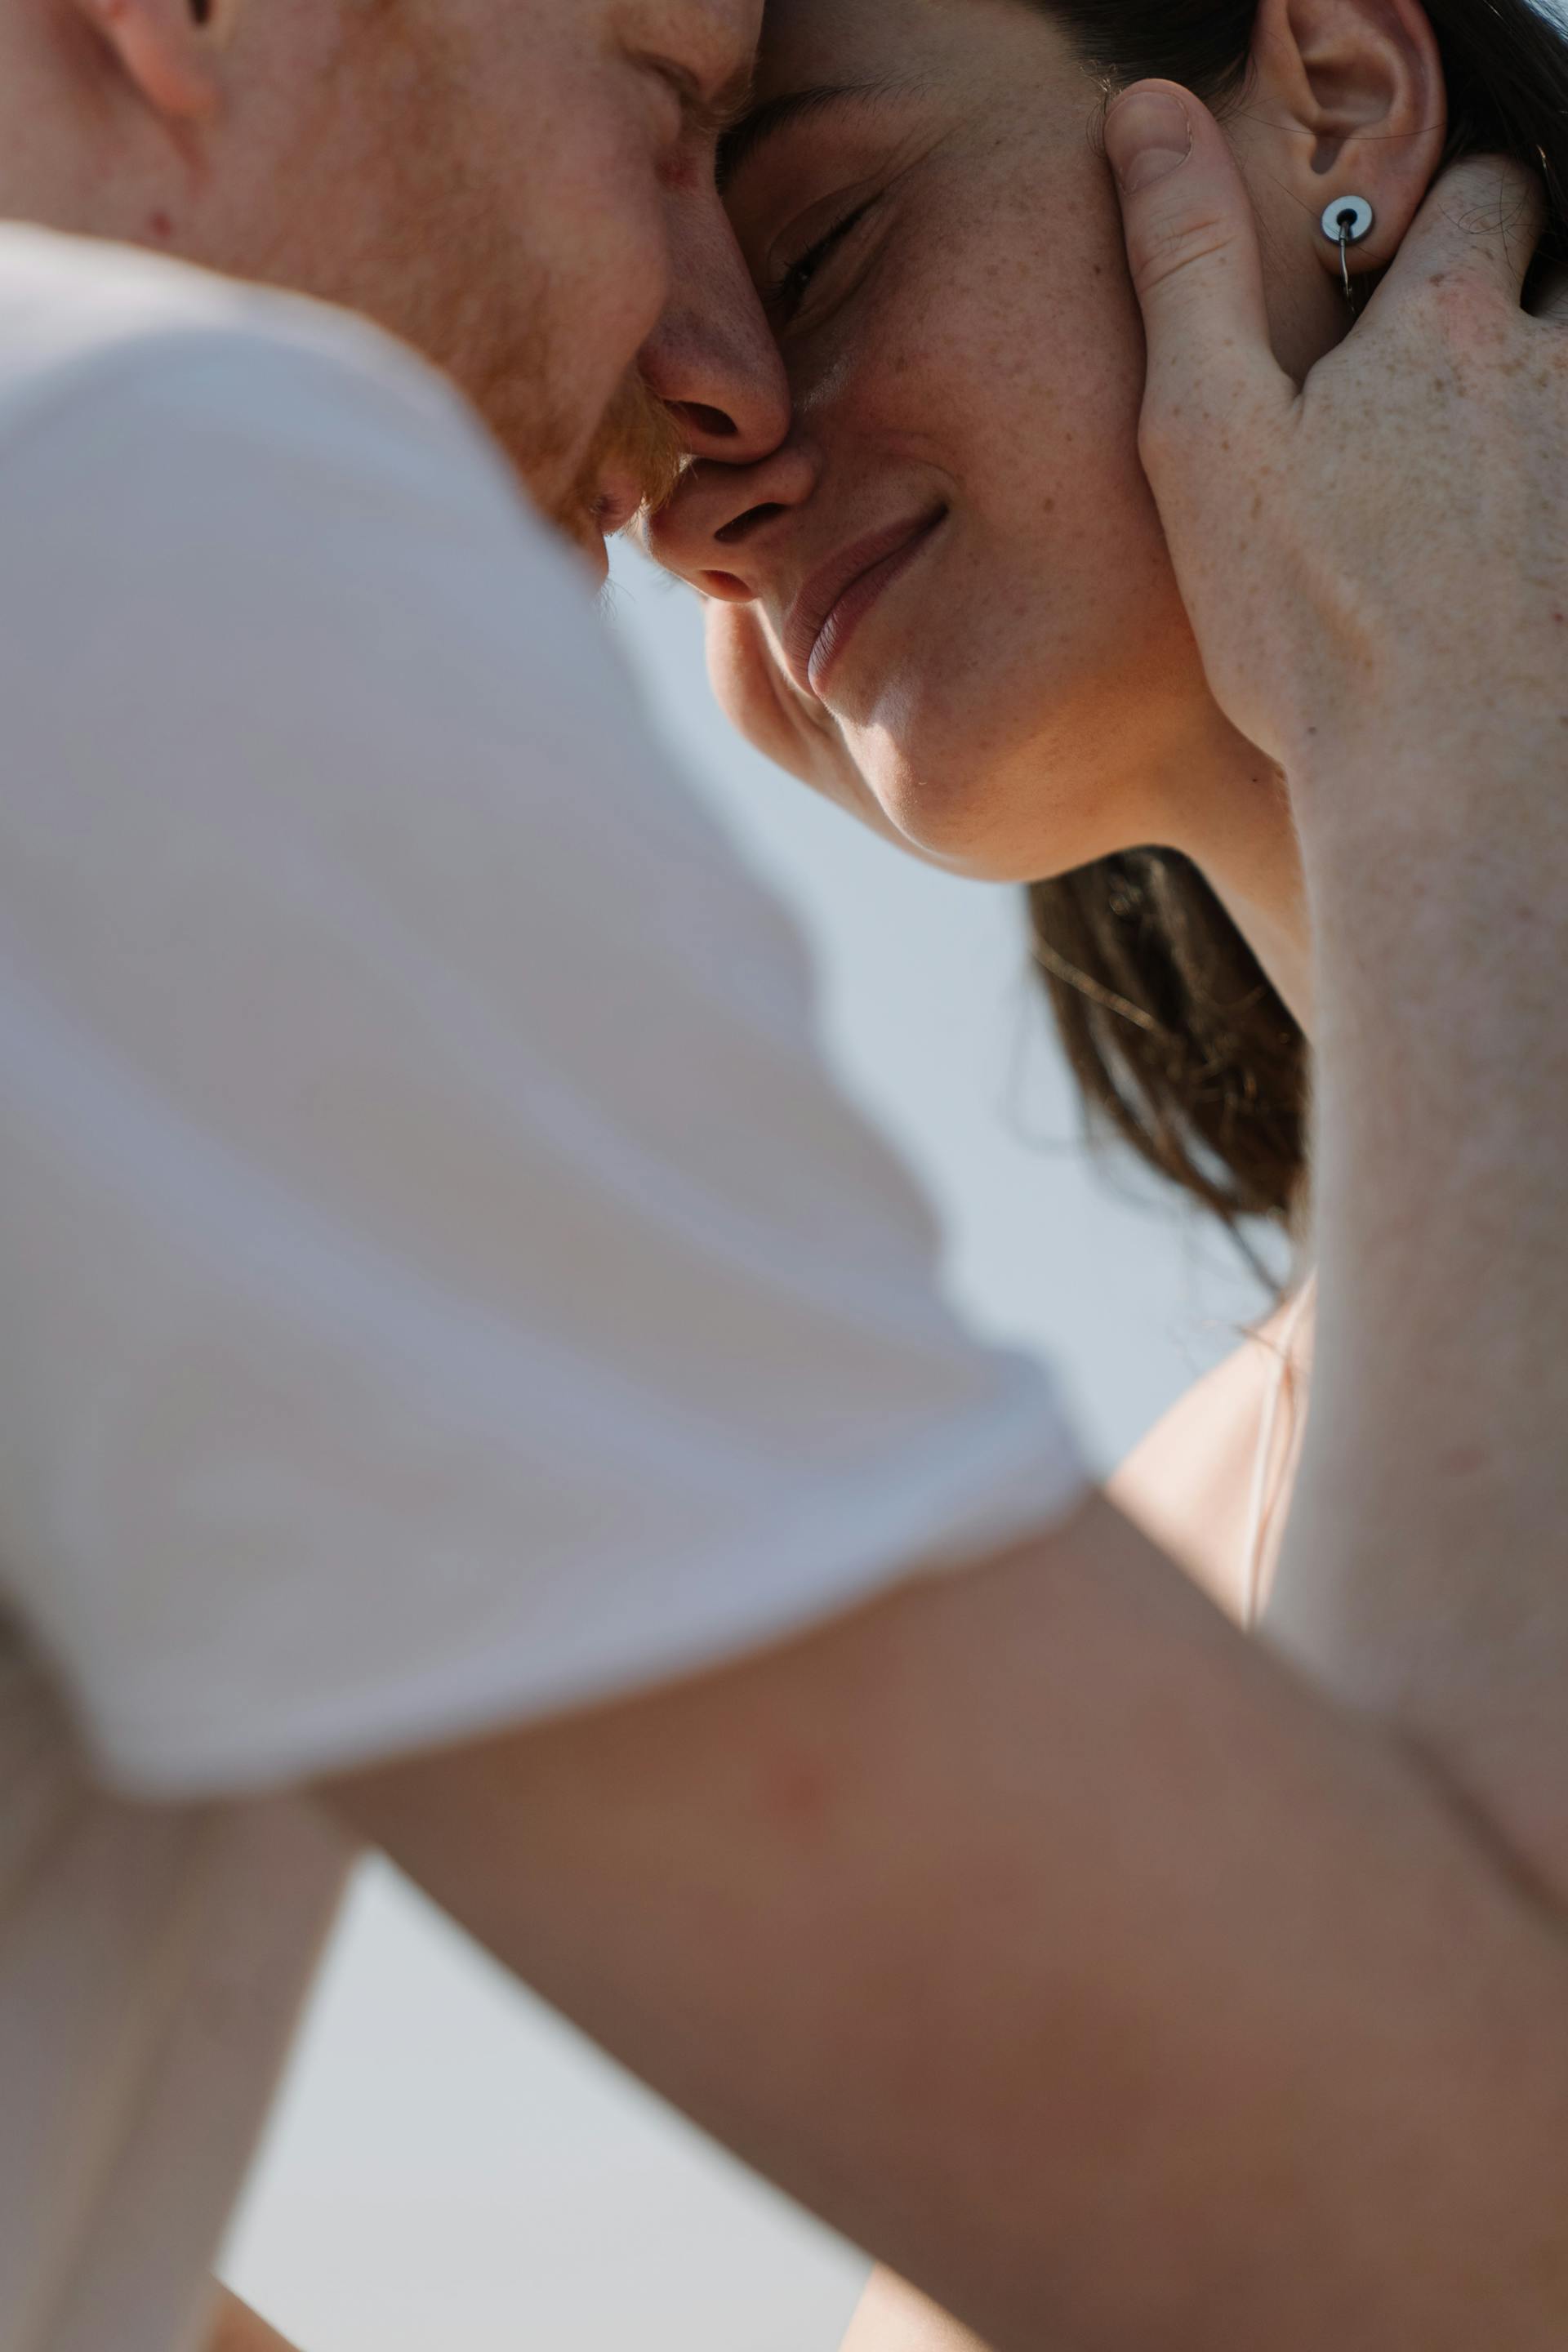 A close-up shot of a couple sharing a tender moment | Source: Pexels